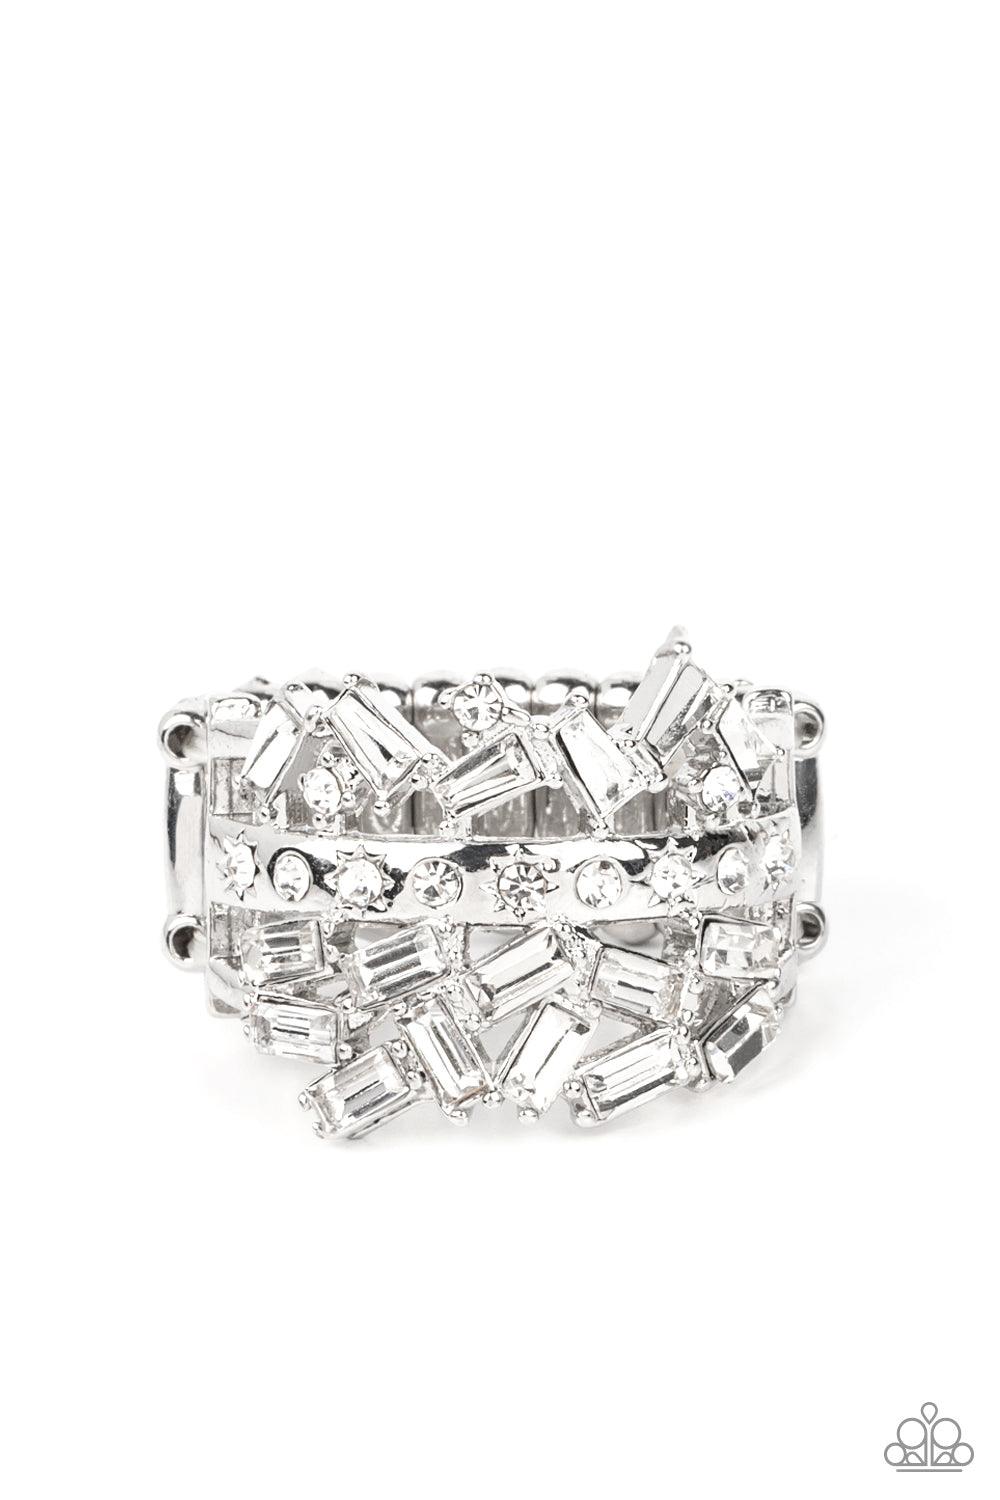 Paparazzi Accessories Scattered Sensation - White Dotted in dainty white rhinestones, a single silver band separates a haphazard explosion of round and emerald cut rhinestones across the finger. Features a stretchy band for a flexible fit. Sold as one ind